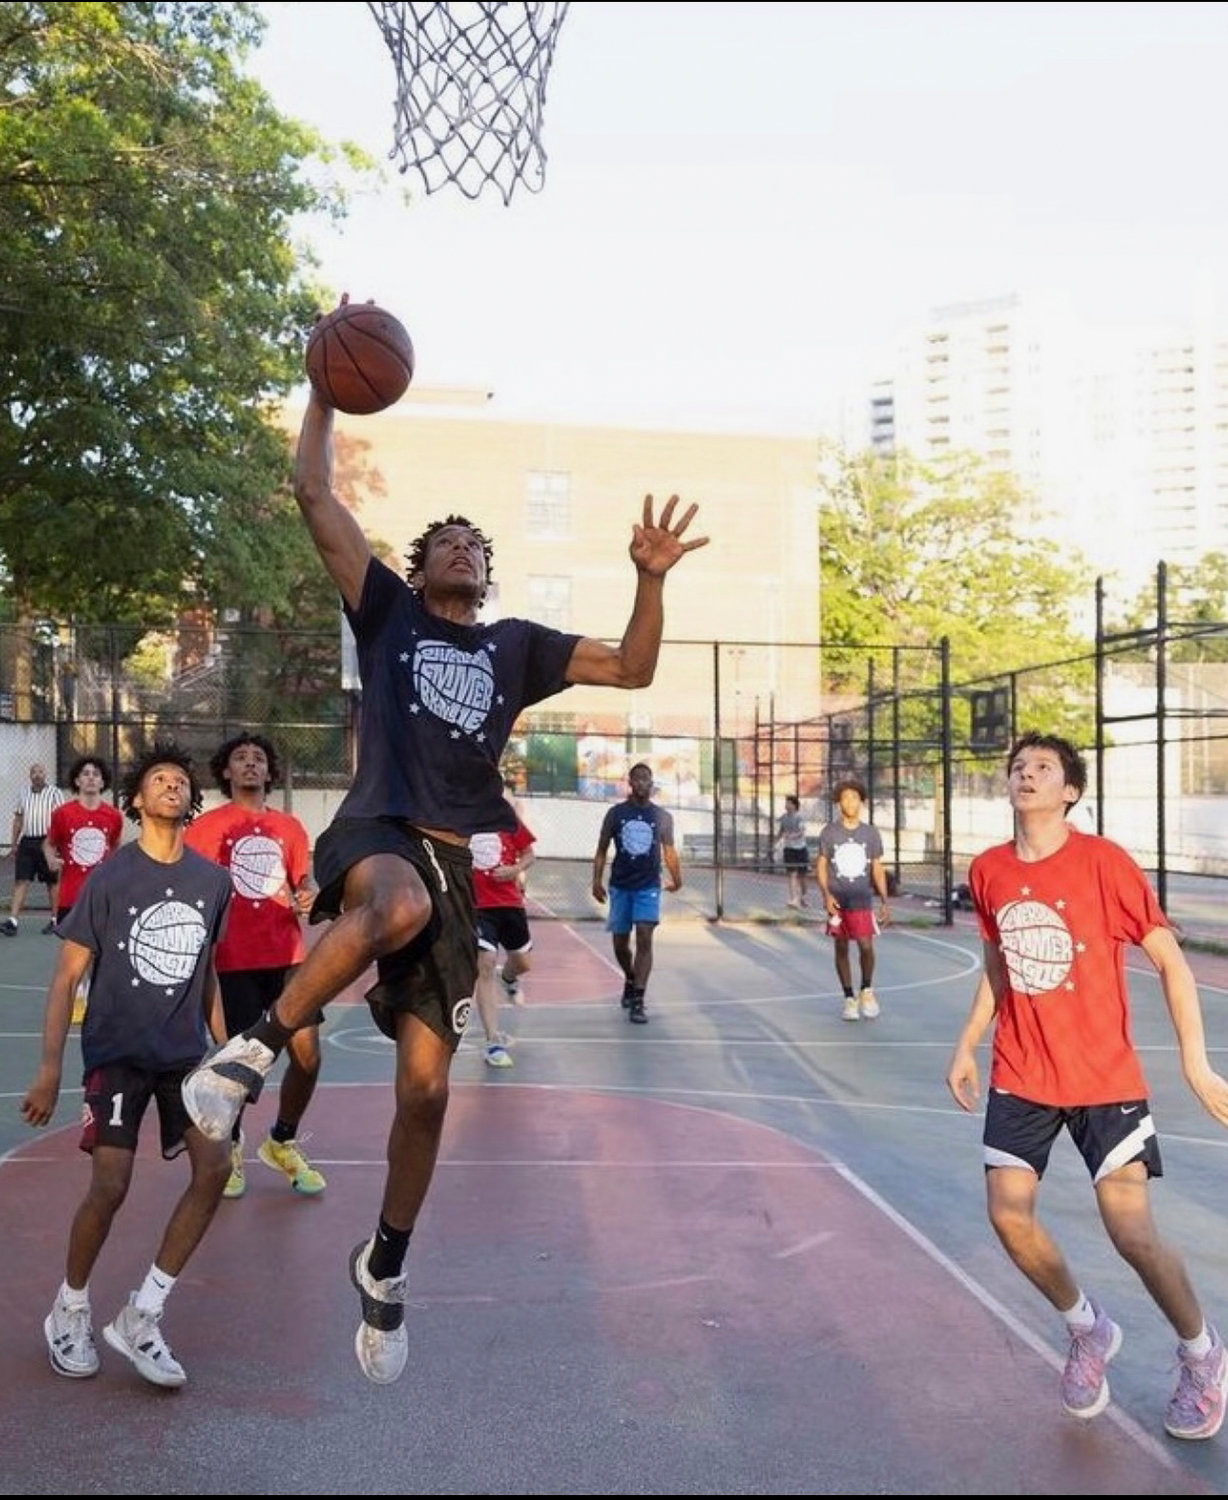 They’re not Dyckman, nor are they Rucker Park. And they don’t want to be. Three men have created an “old school” circuit called the Riverdale Summer League which is attracting the best high school basketball programs across the city.